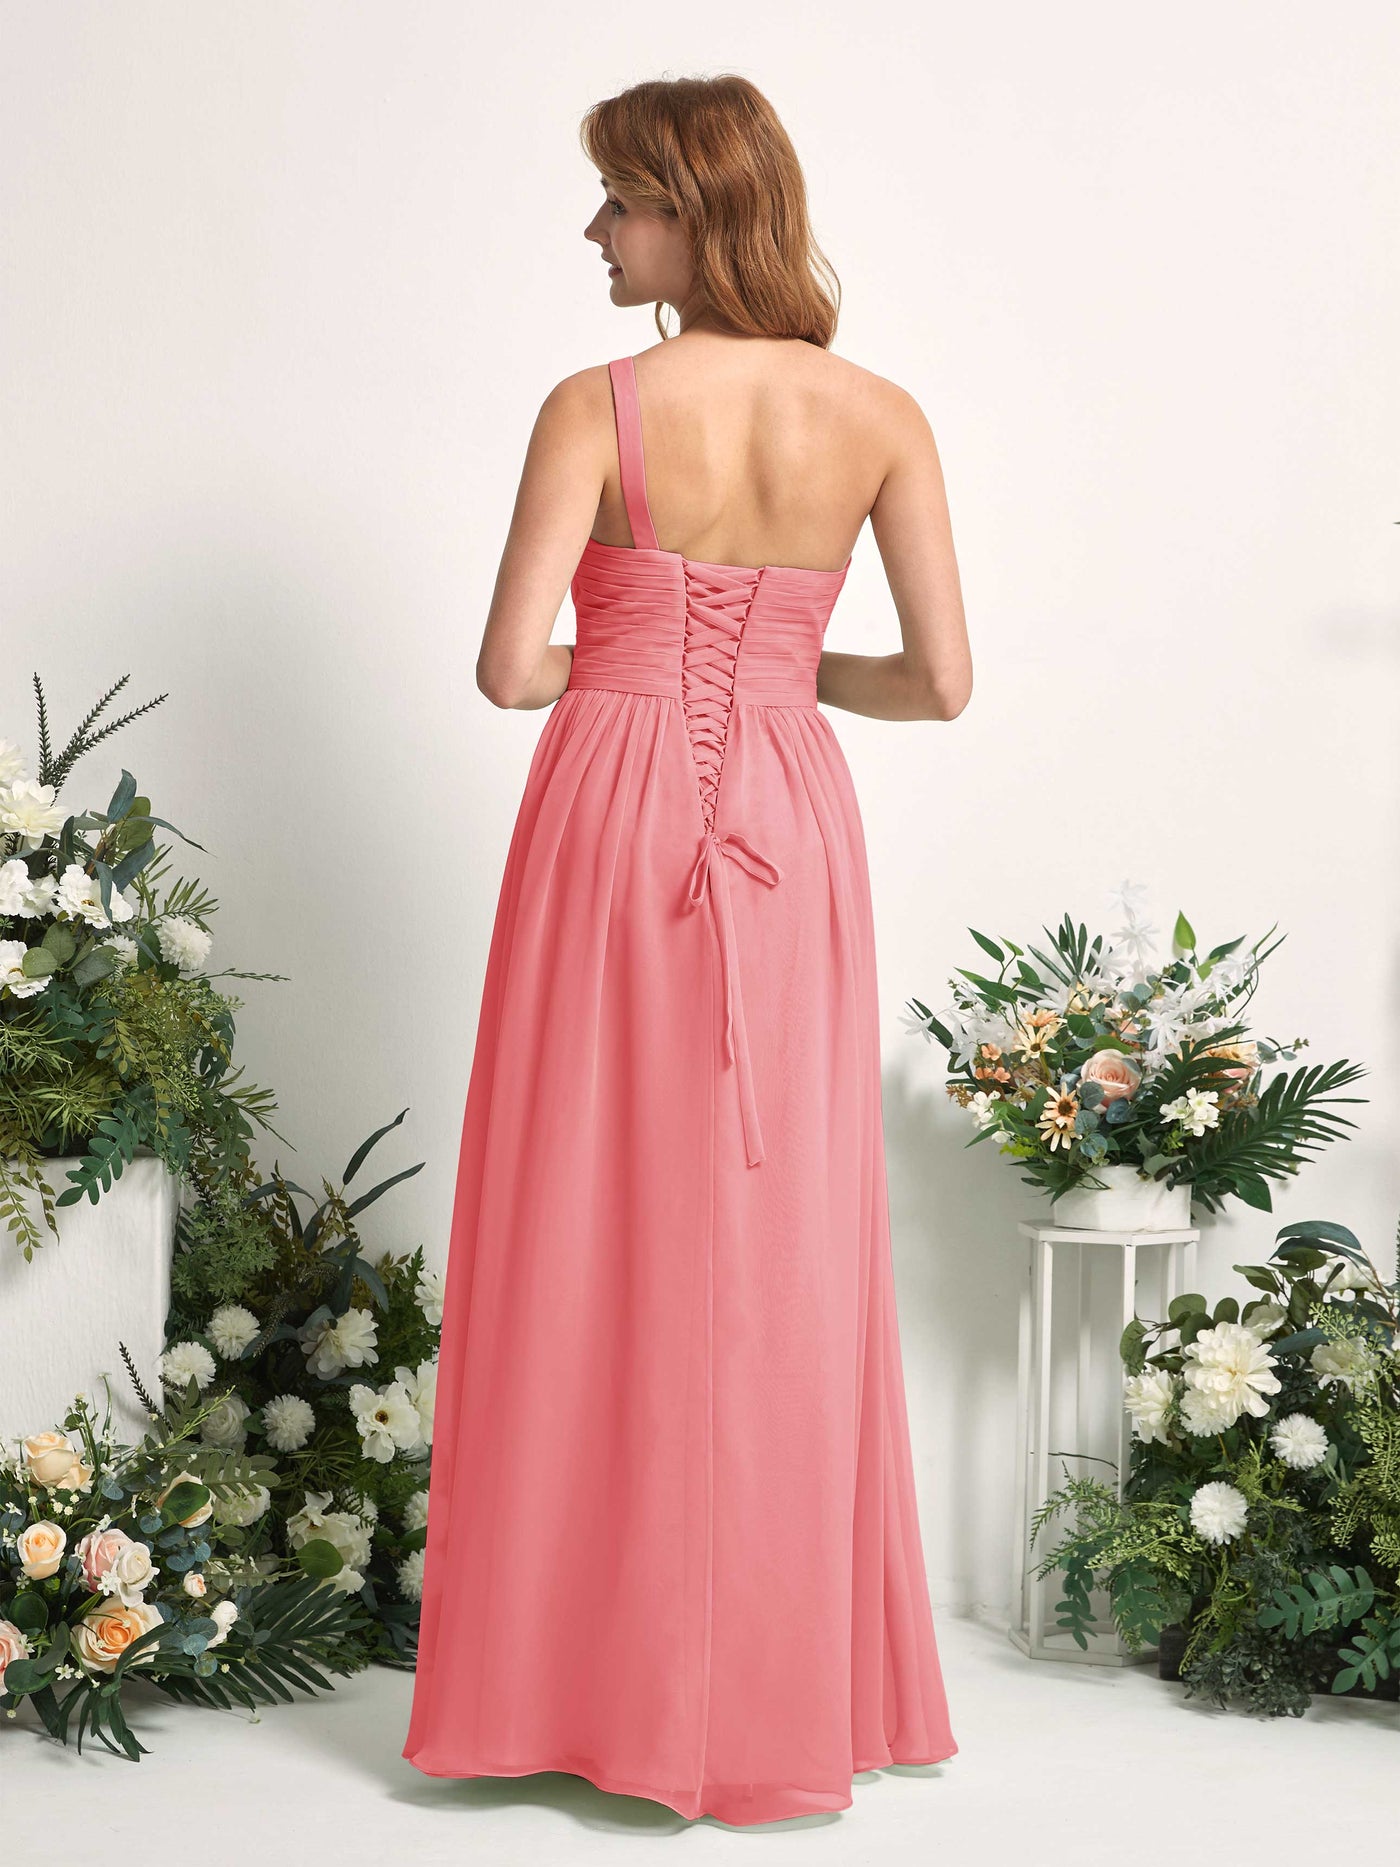 Bridesmaid Dress A-line Chiffon One Shoulder Full Length Sleeveless Wedding Party Dress - Coral Pink (81226730)#color_coral-pink